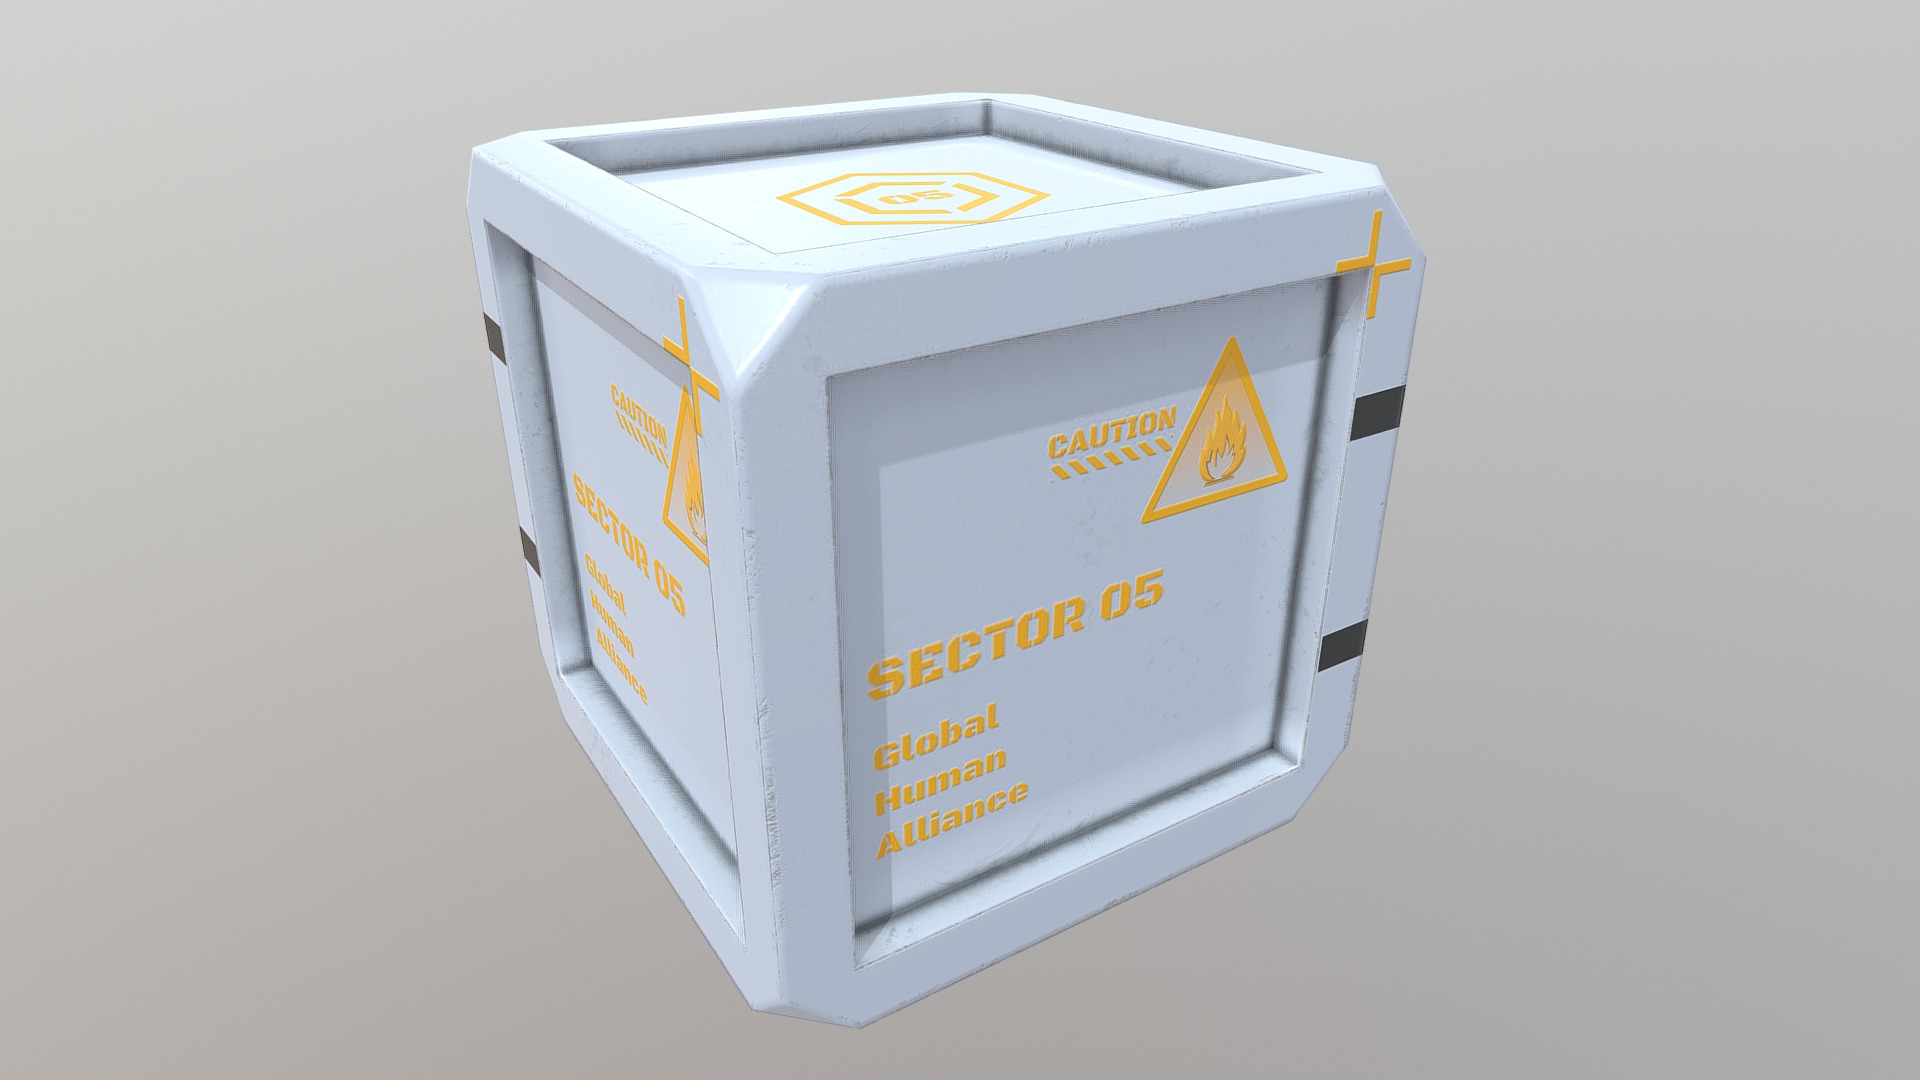 3D model Sci-Fi Storage Crate #5 - This is a 3D model of the Sci-Fi Storage Crate #5. The 3D model is about a white box with yellow text.